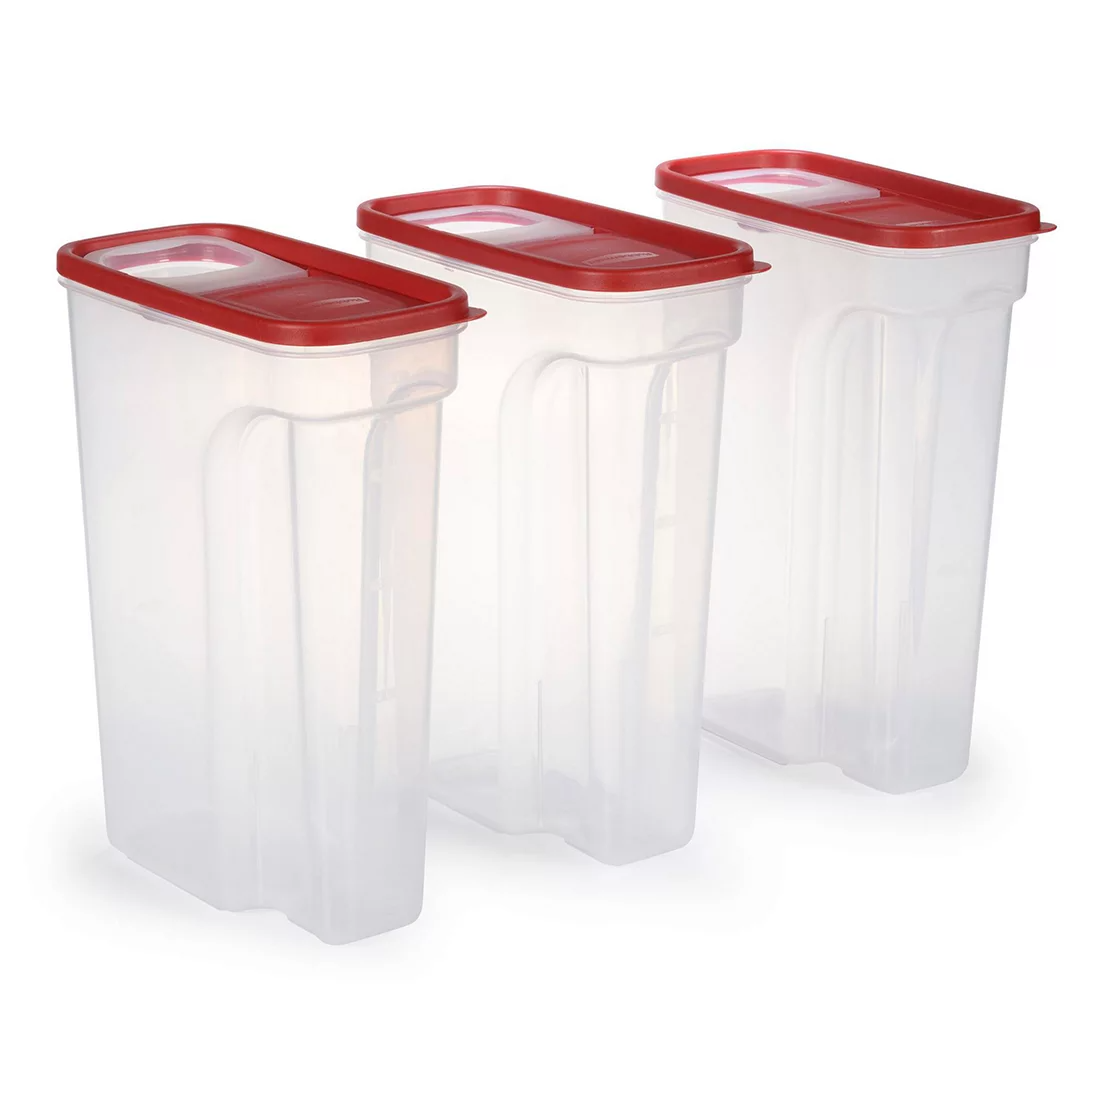 Rubbermaid Dry Food Canister, 16-Cup